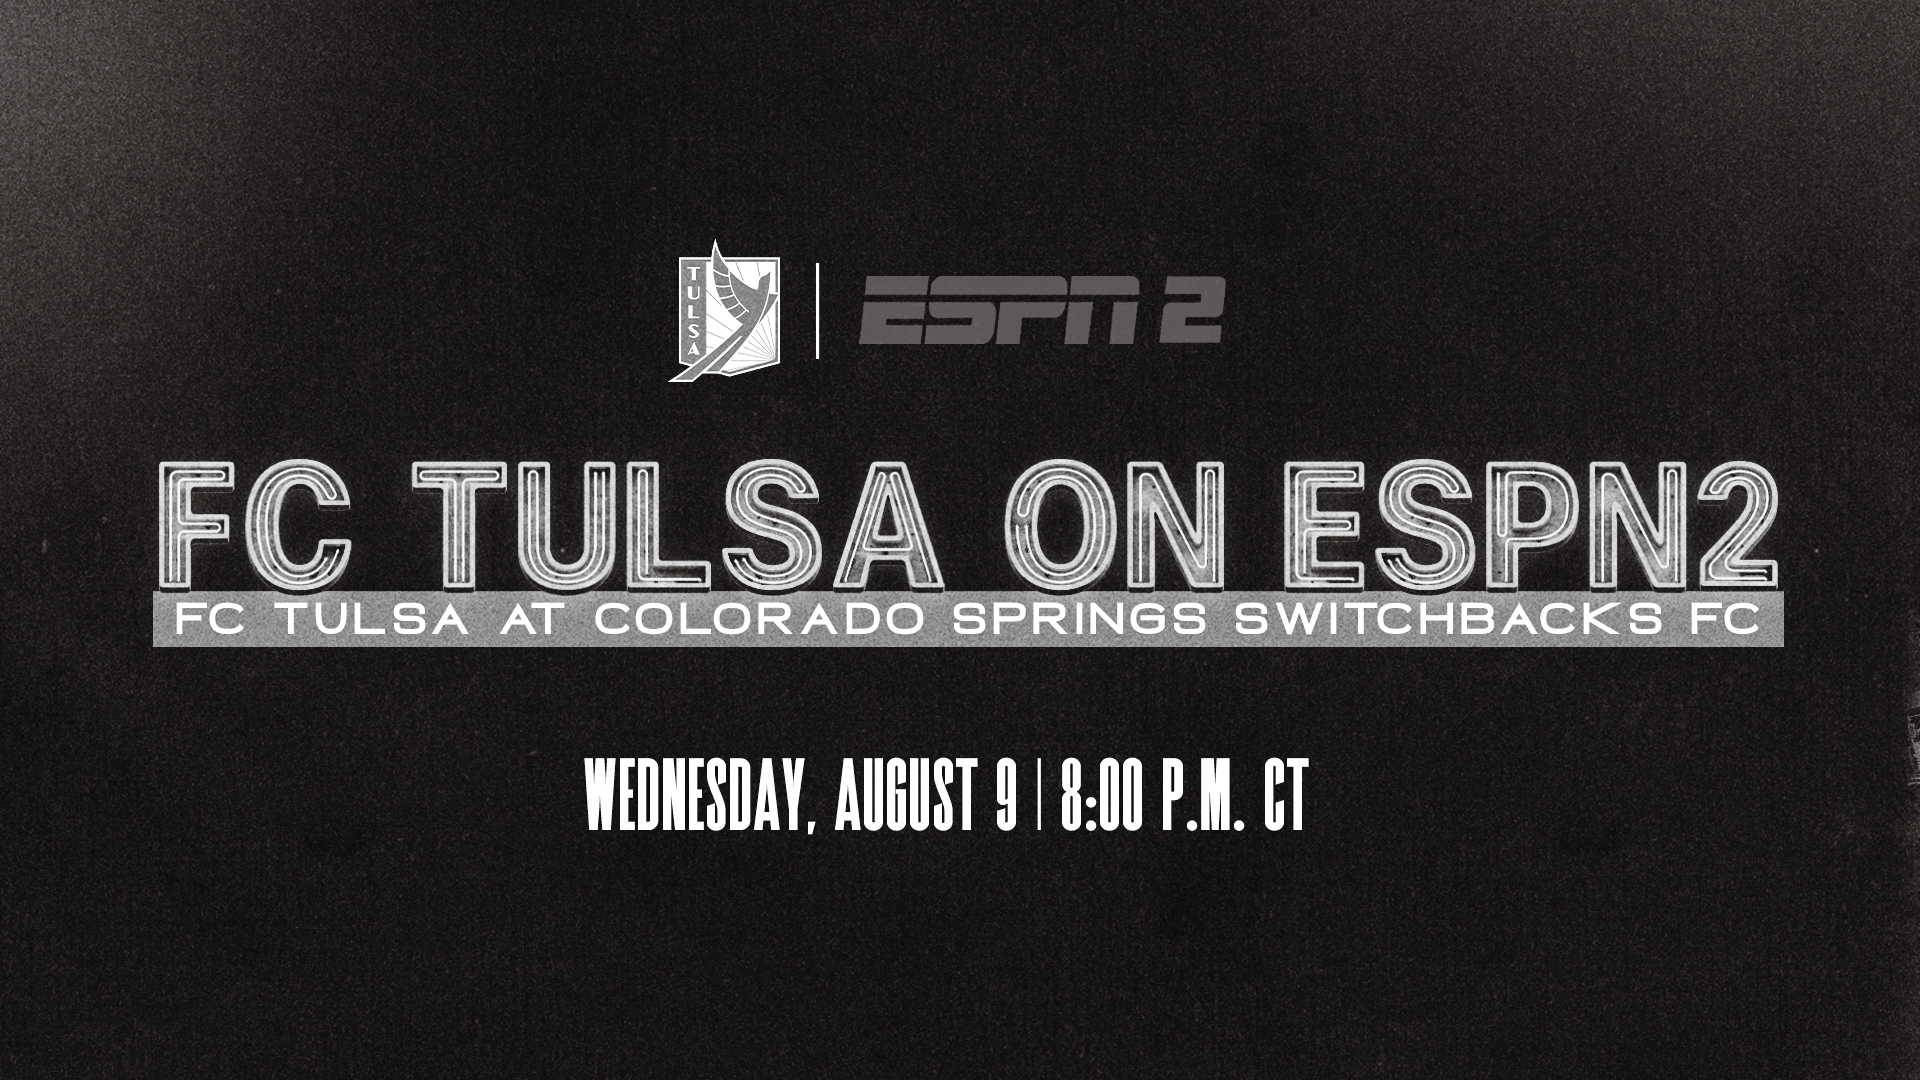 All USL Championship Matches Available Live on ESPN Platforms - Indy Eleven